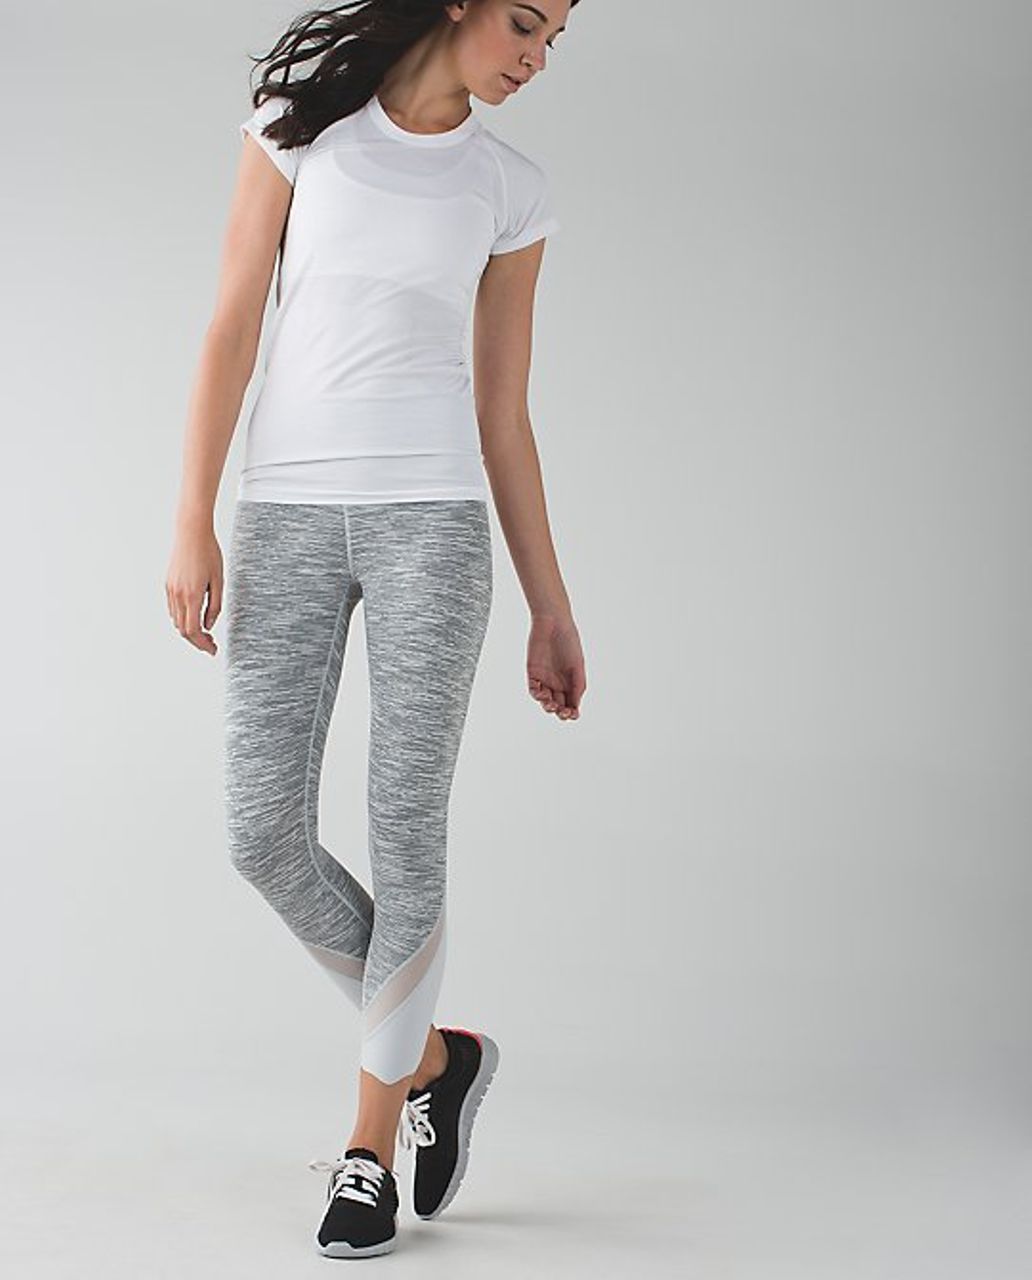 Lululemon Wunder Under Crop II (Roll Down Mesh) - Wee Are From Space Silver Spoon / Silver Spoon